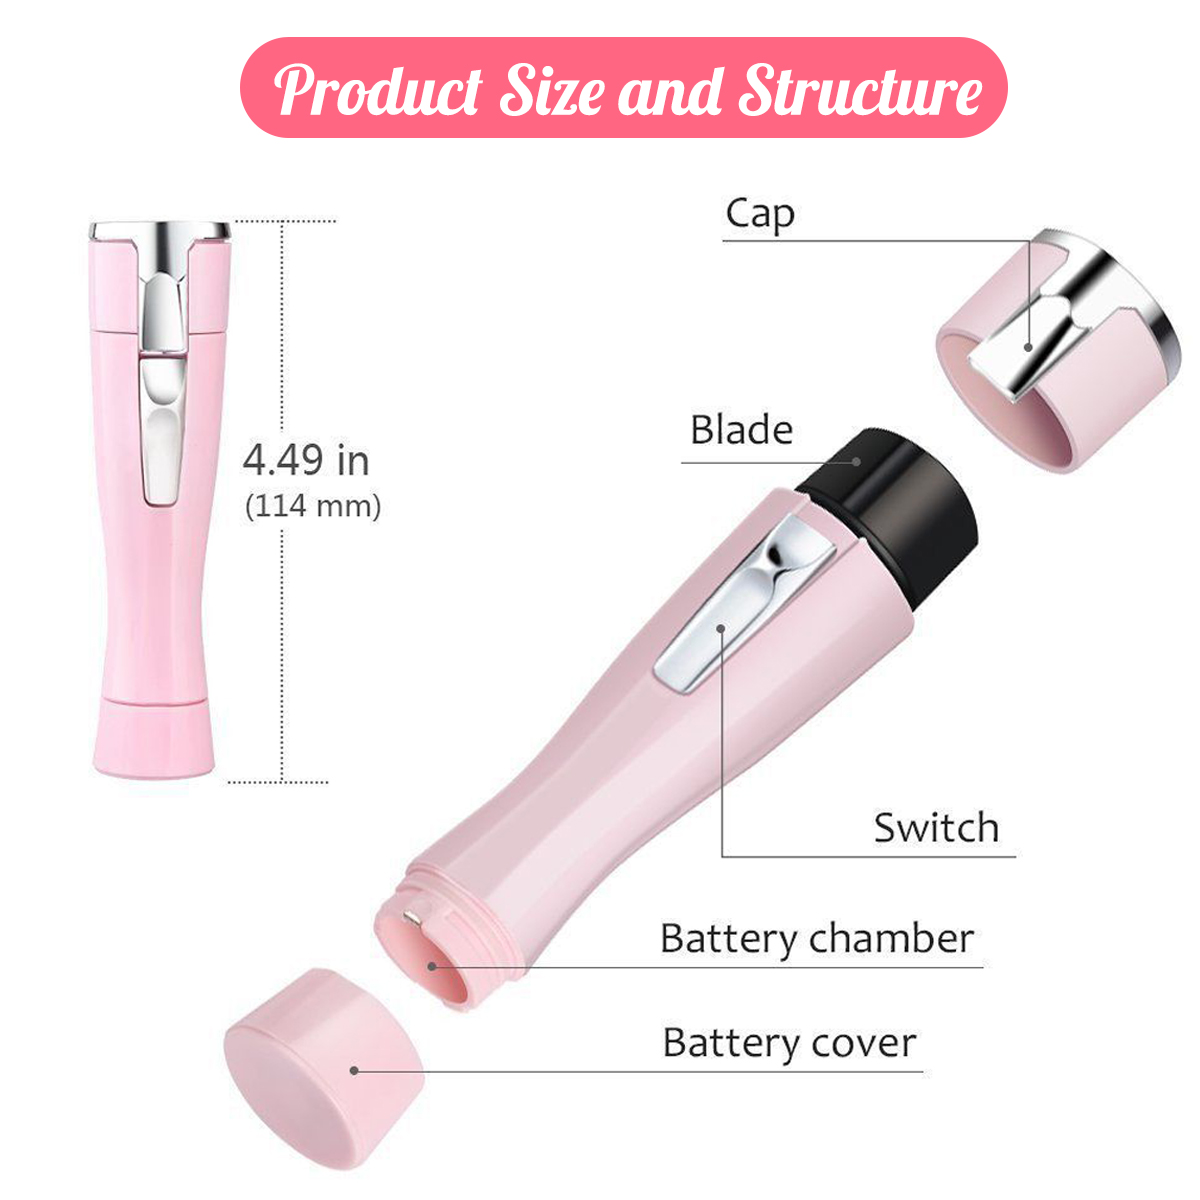 Mini-Electric-Portable-Flawless-Womens-Face-Shaver-Travel-Size-Facial-Hair-Remover-Painless-Lady-Tri-1384371